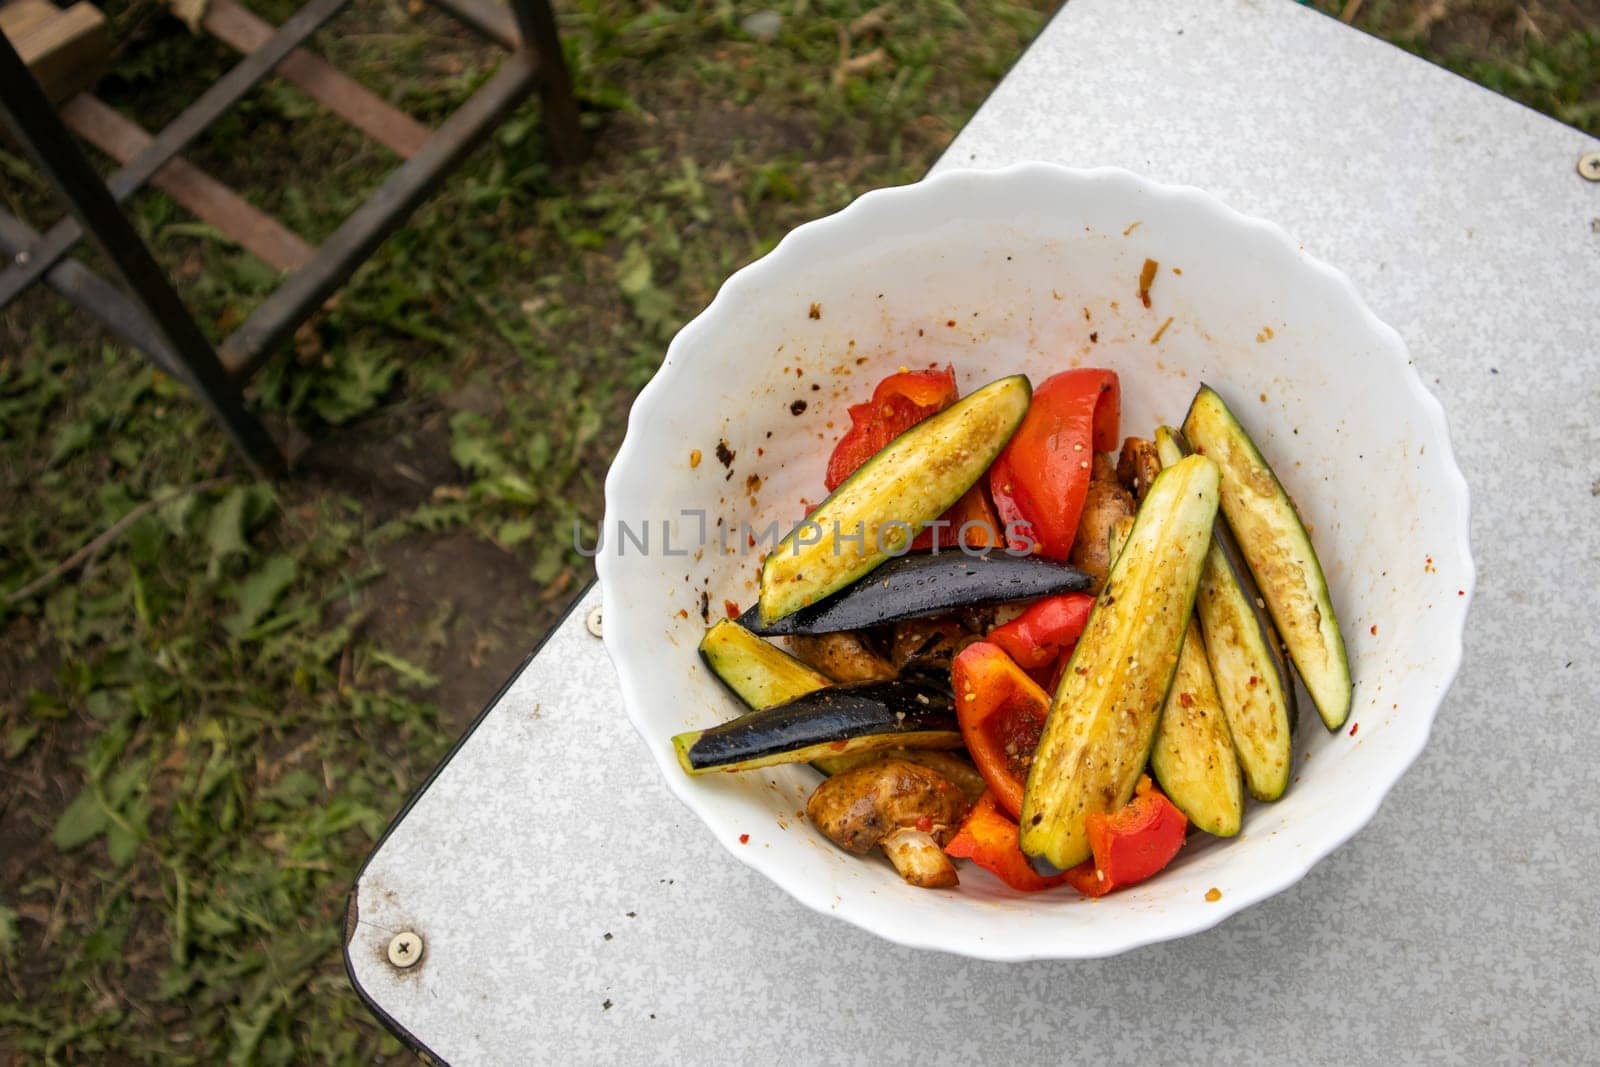 Delicious sliced grilled vegetables. Rustic background lawn and barbecue.